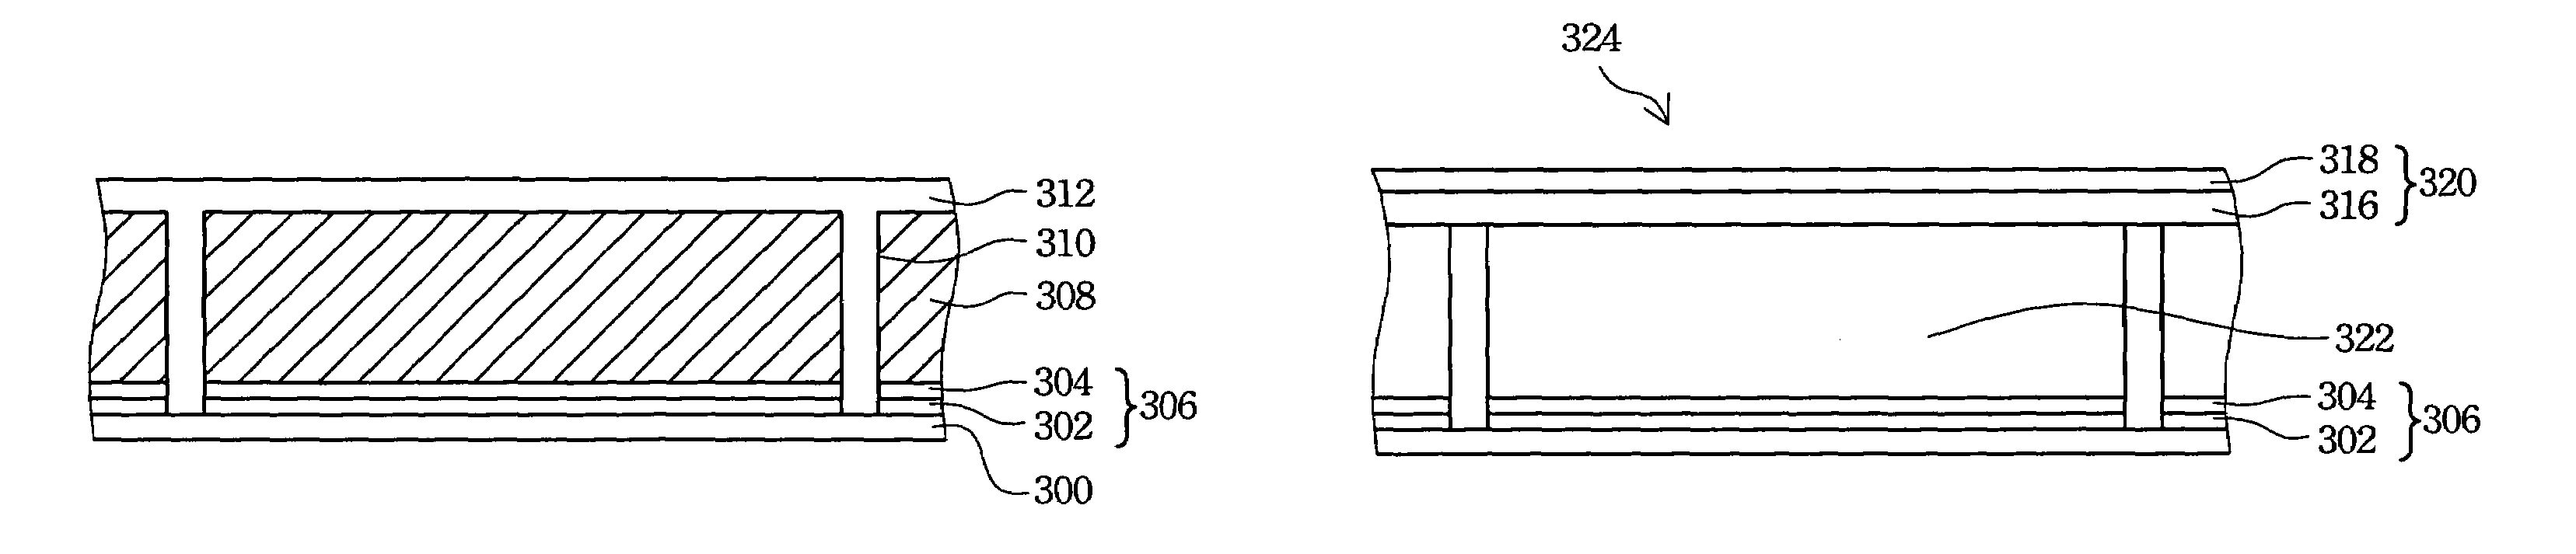 Structure of an optical interference display unit